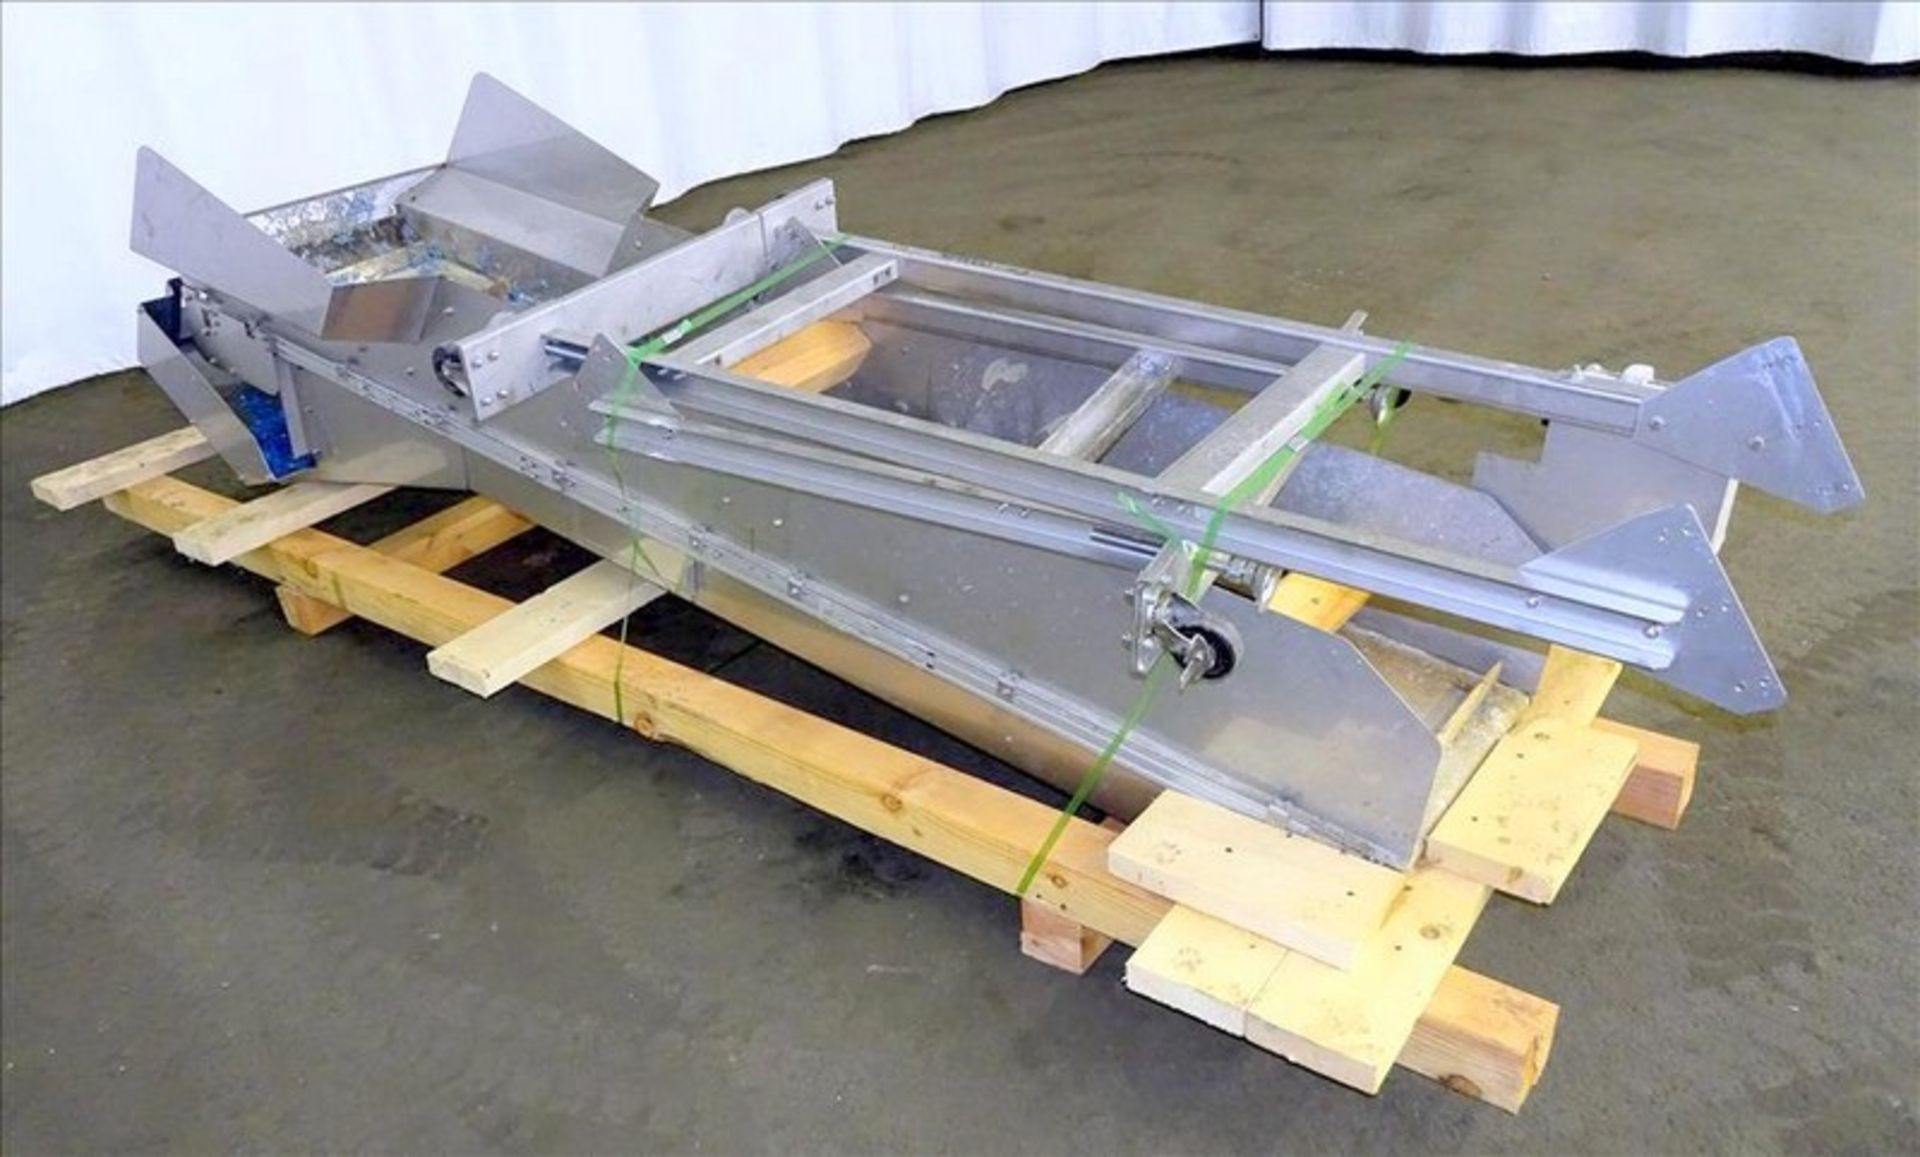 Kanemiya Plastic Bag Washer, Model KSW1545, with rubber pleated inclined feed conveyor. Cut costs - Image 15 of 21